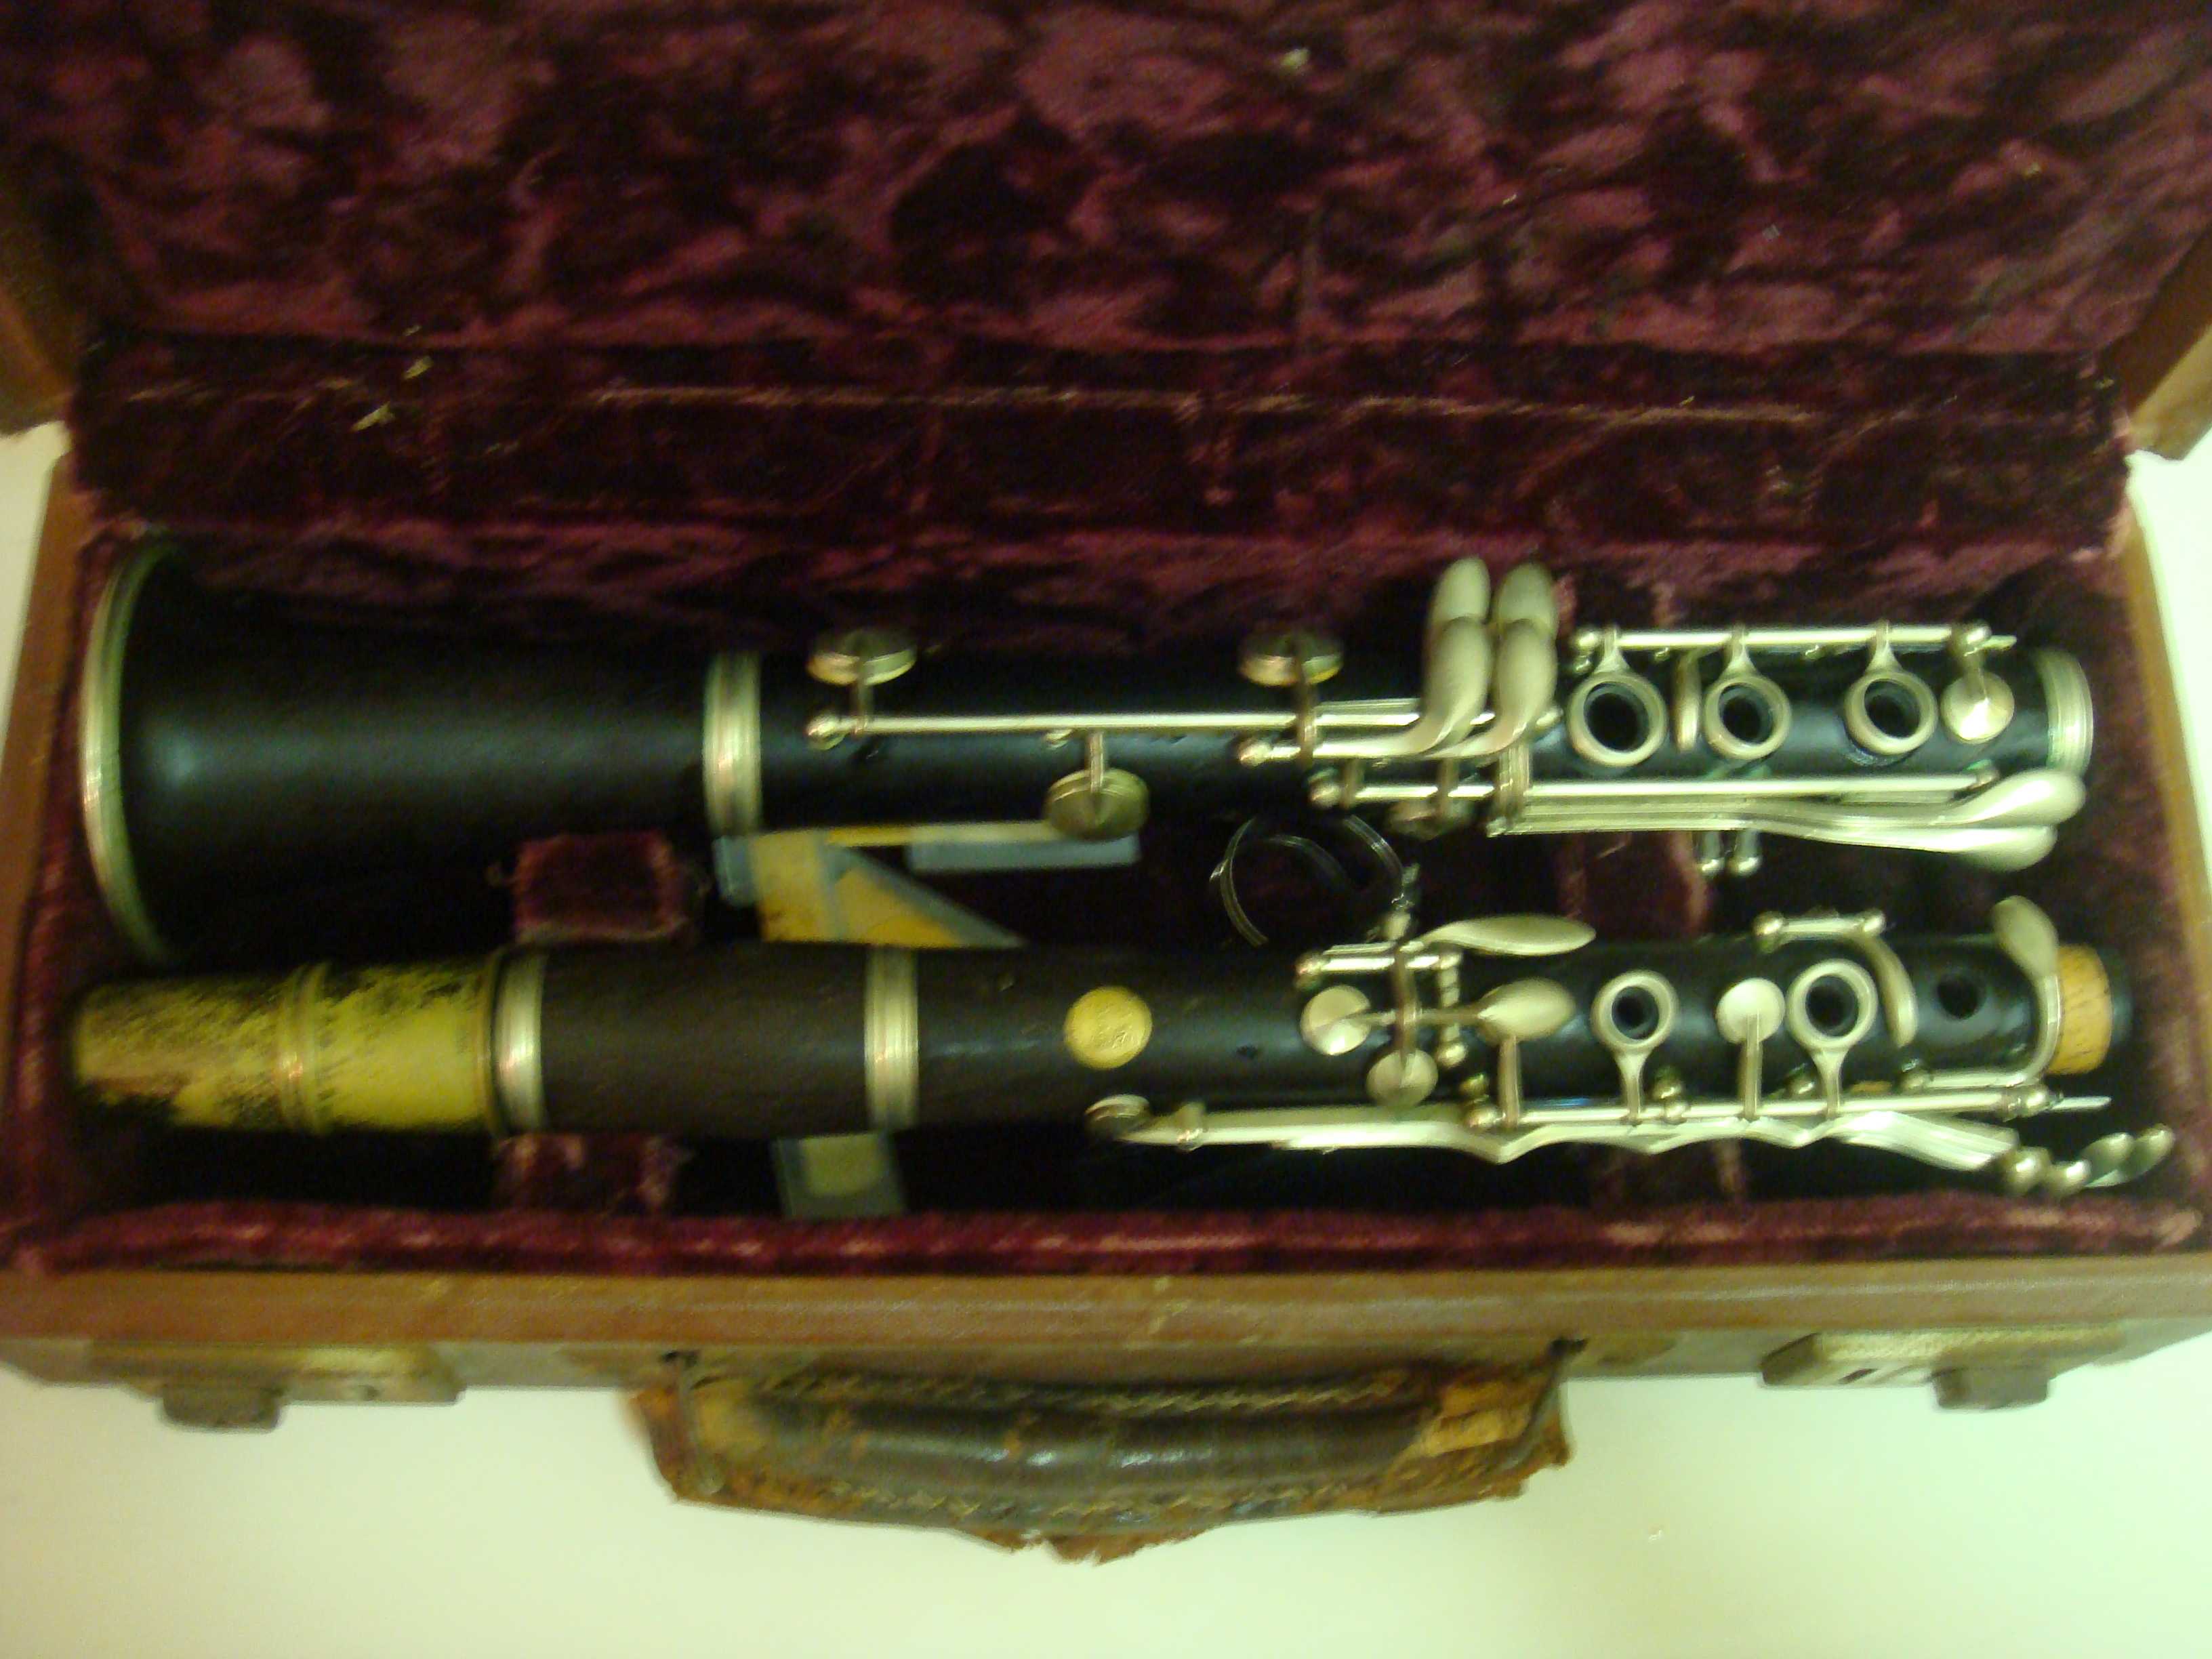 Selmer clarinet serial number chart